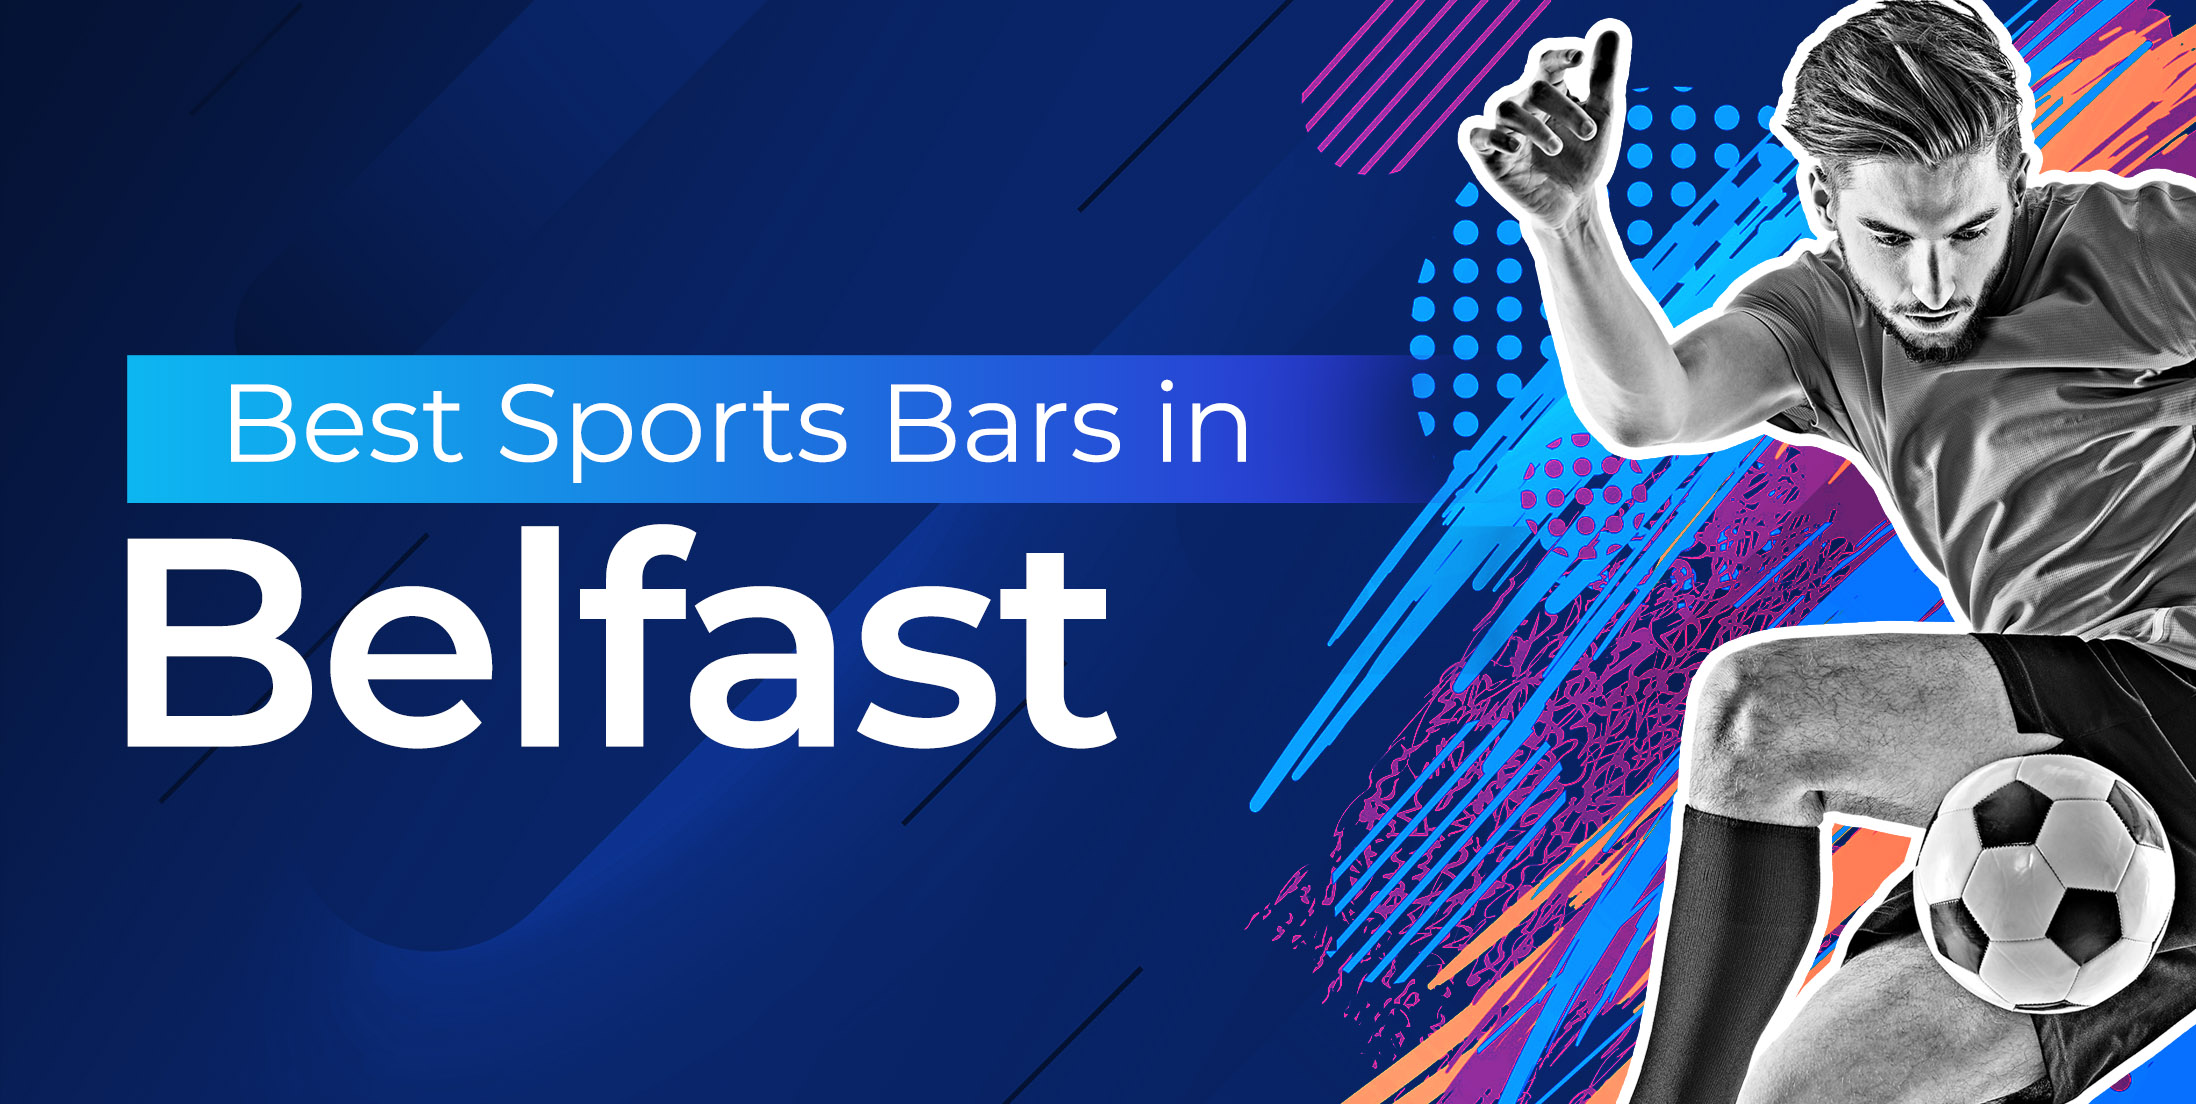 The Best Sports Bars in Belfast